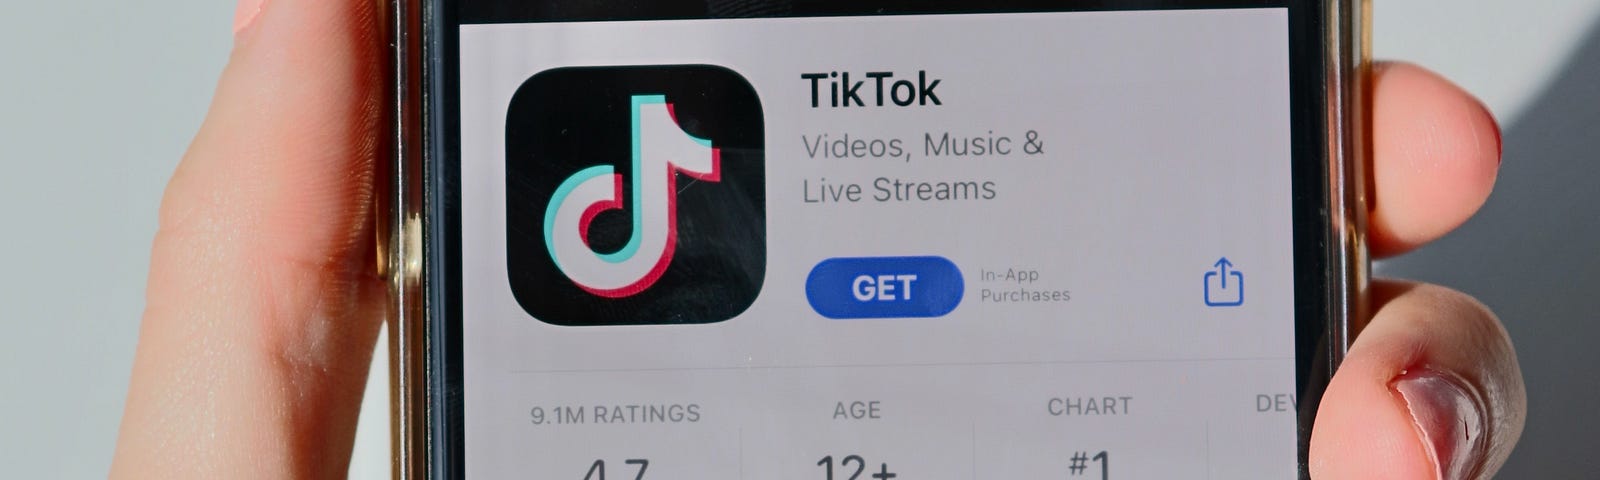 Someone holds up their phone to the camera, showing the home screen of the Tik Tok social media app.